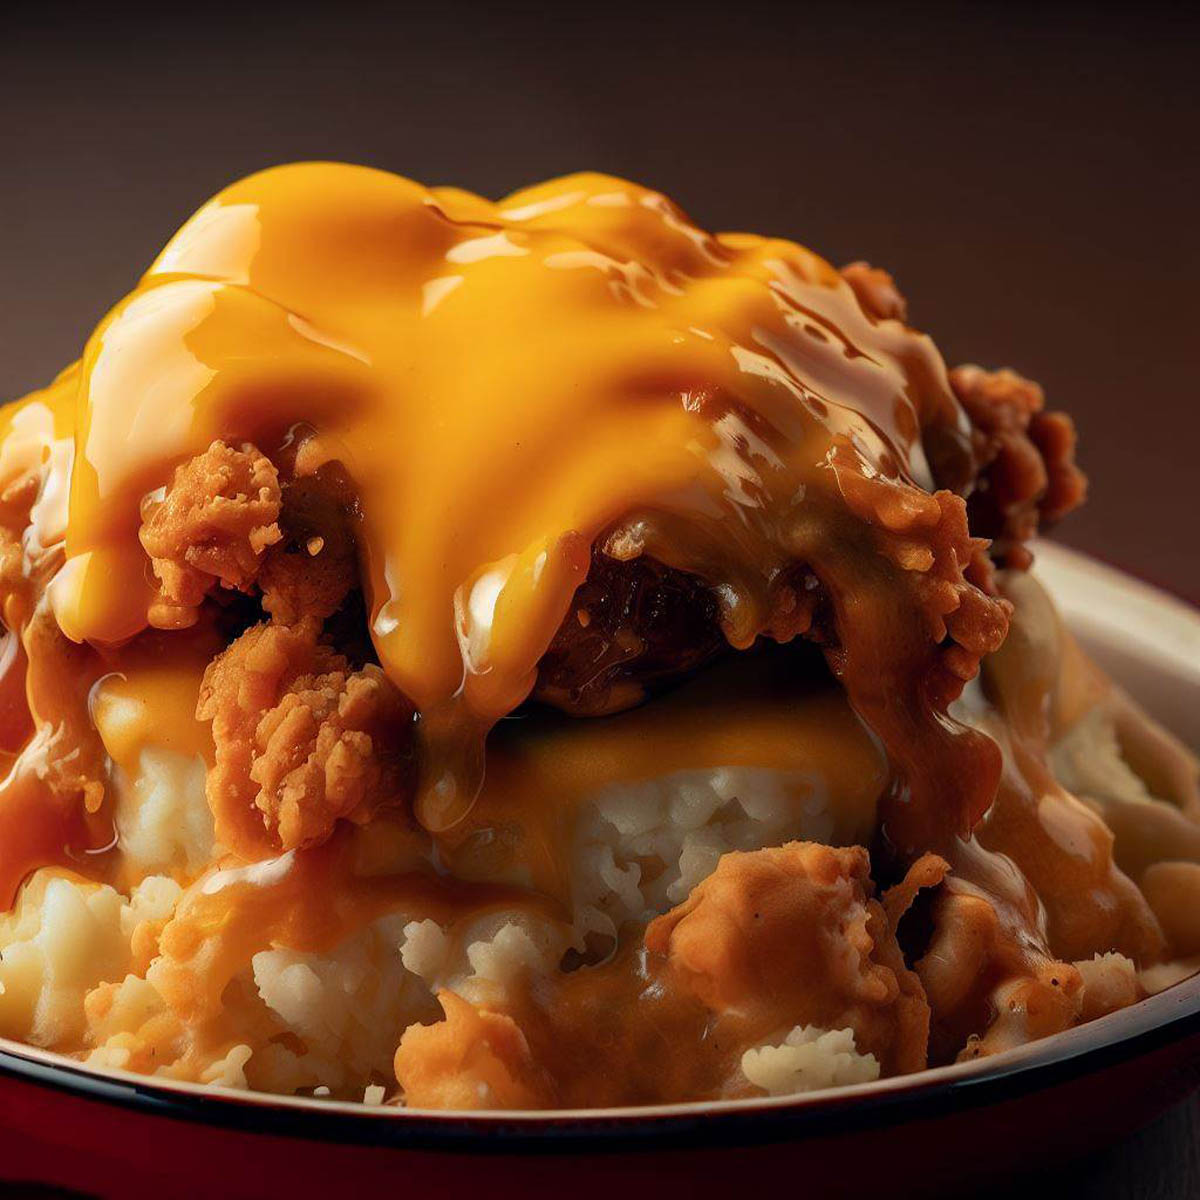 A closeup view of the KFC Famous Bowl Casserole highlighting the melting cheese on top.